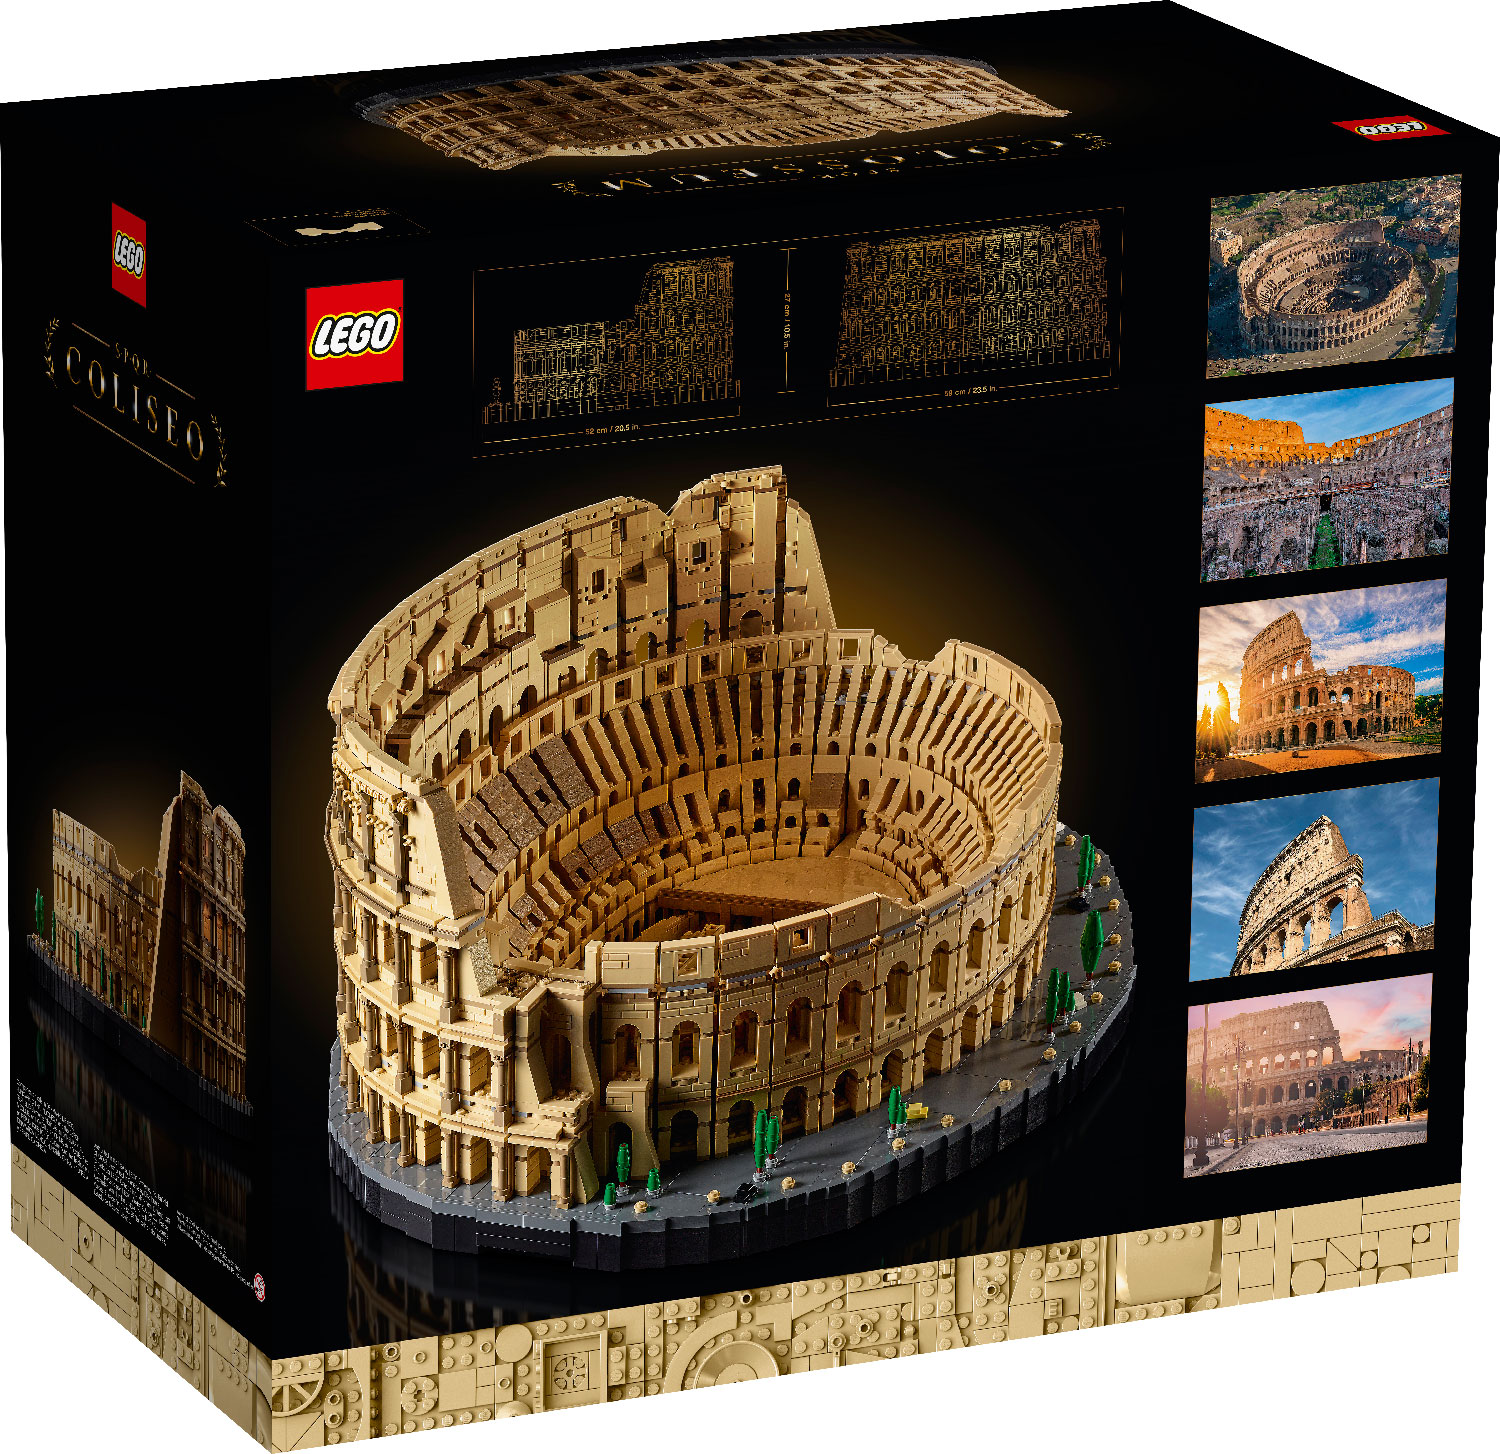 LEGO Colosseum (10276) Officially Unveiled As The Largest Set Ever, Near 10,000 Pieces | Geek 